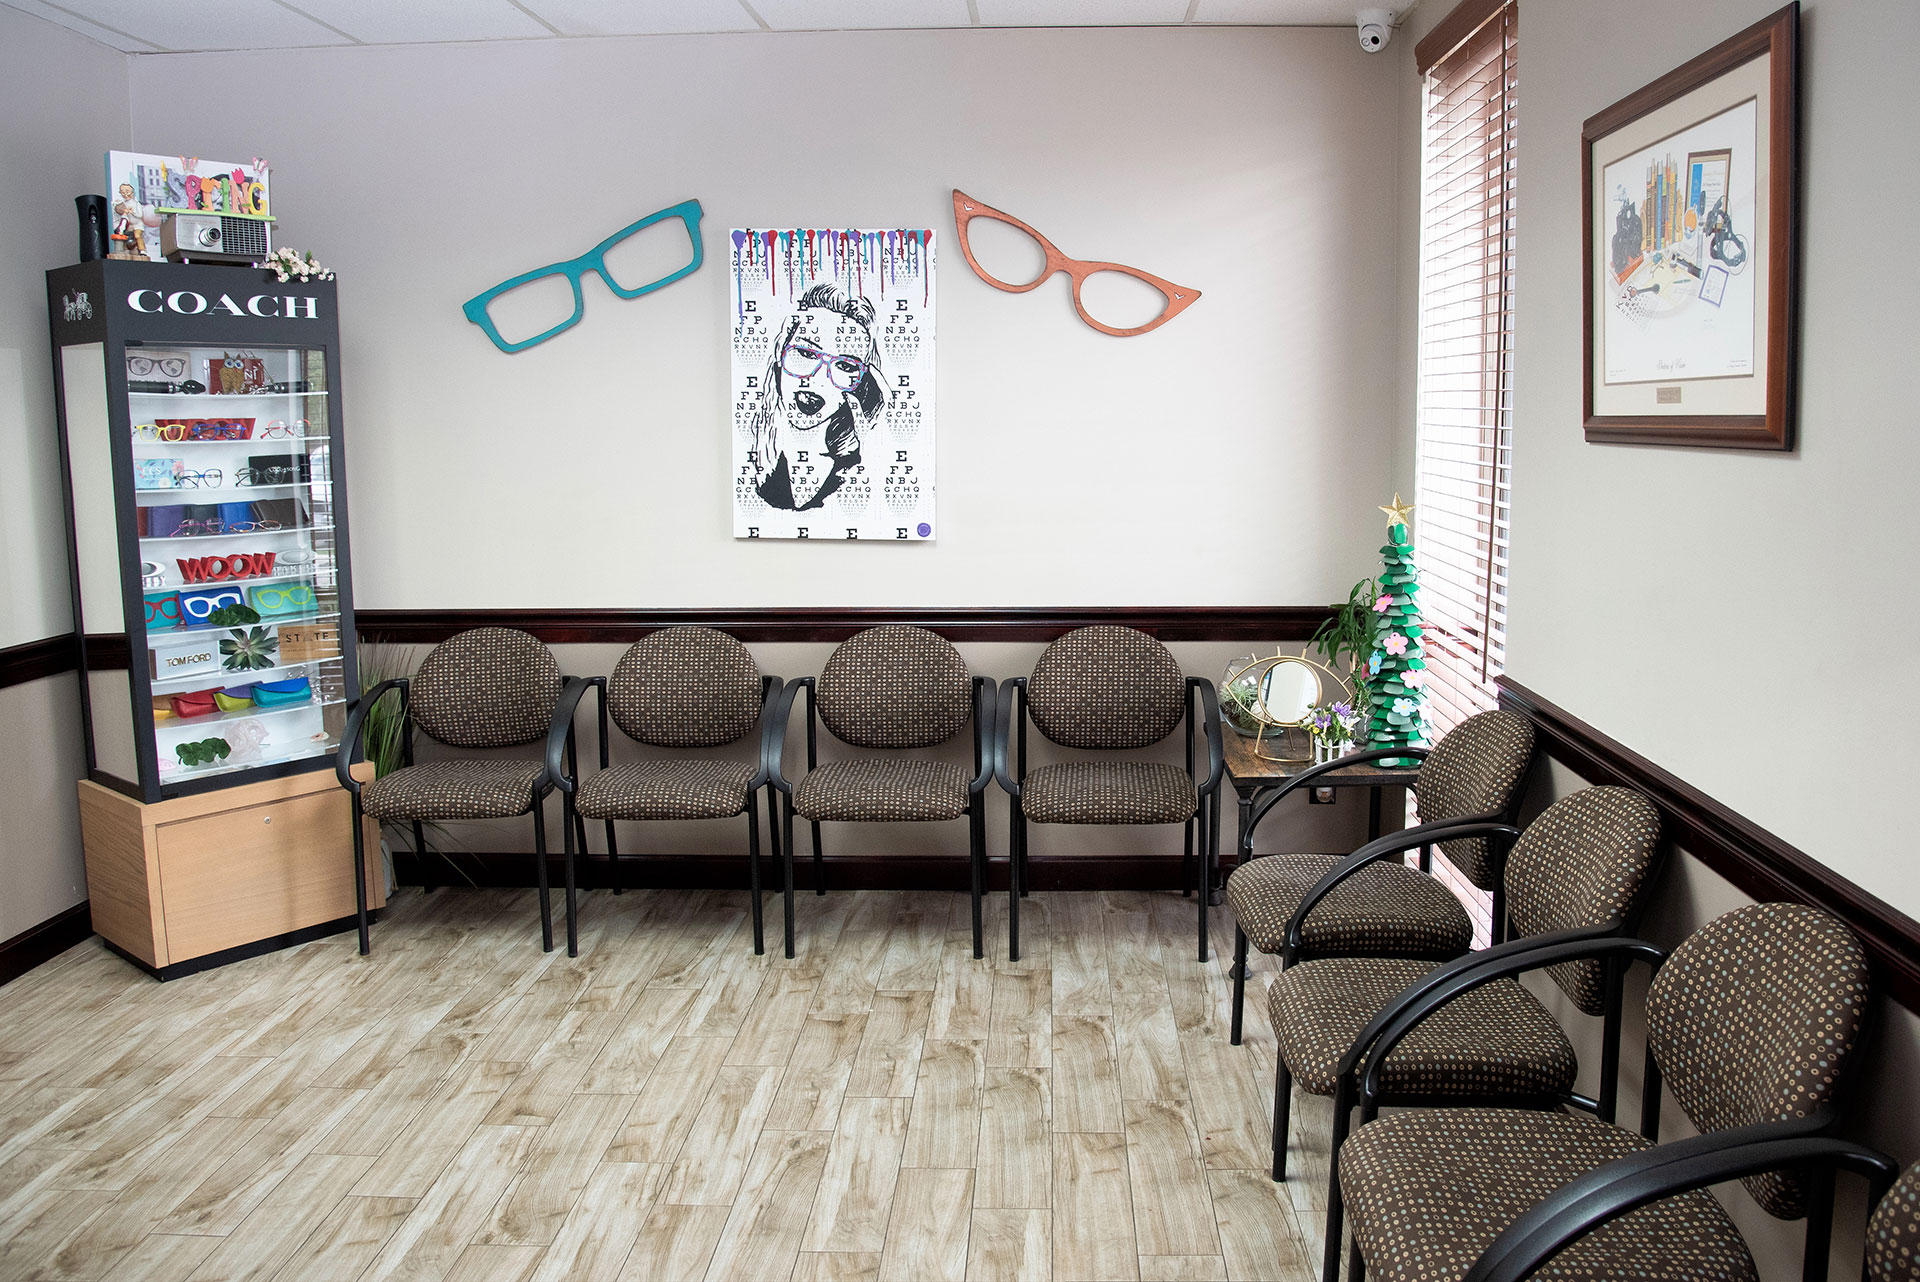 Professional Optometry Vision Care